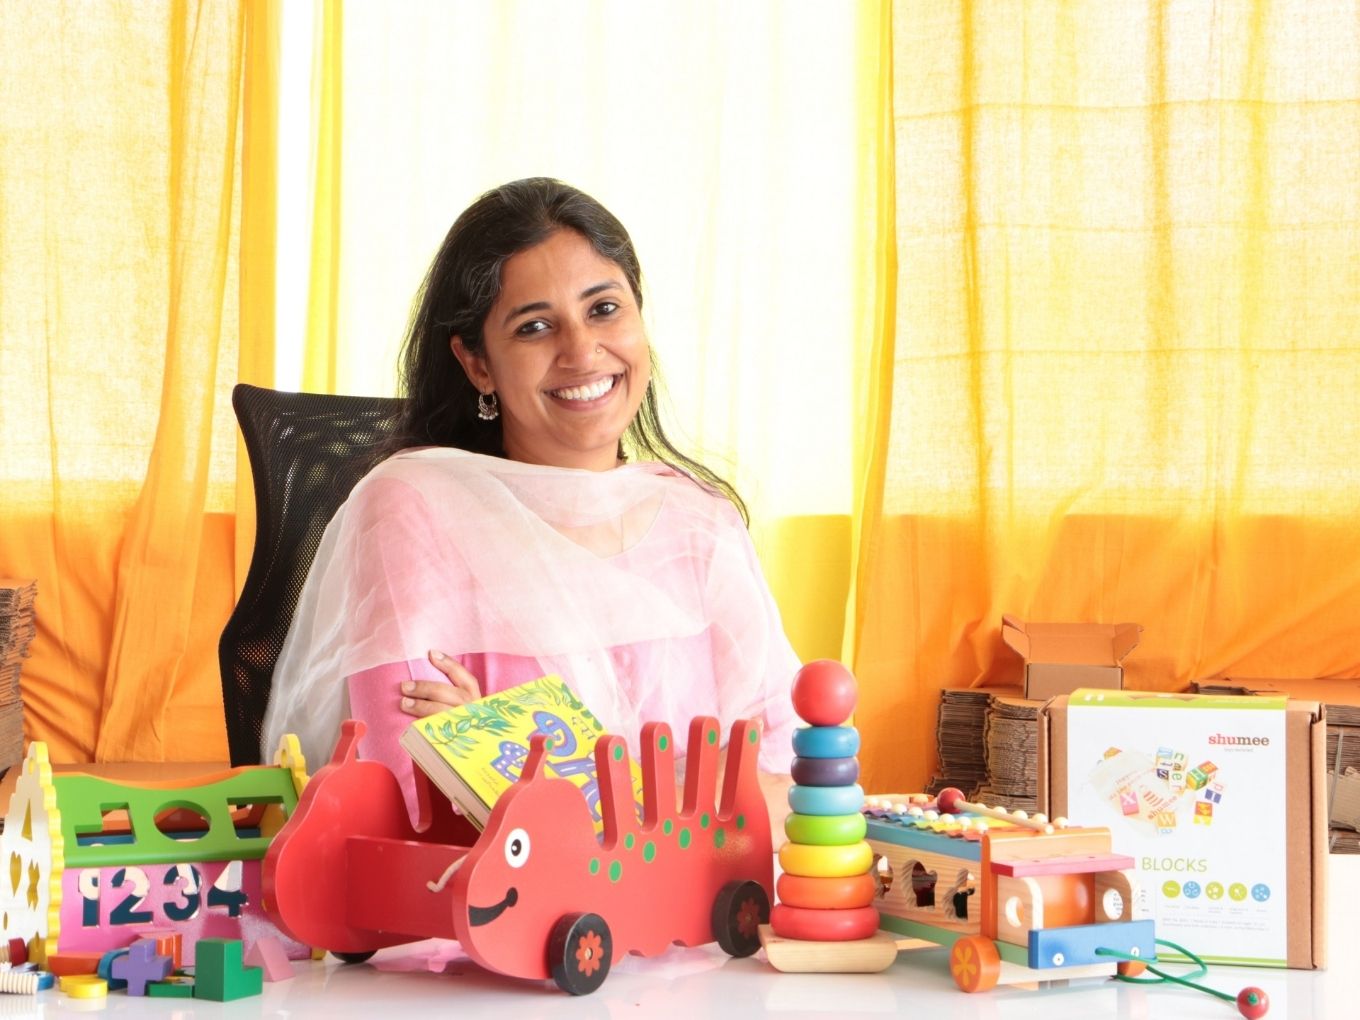 D2C-Focused Firm Fluid Ventures Invests In Sustainable Toy Startup Shumee